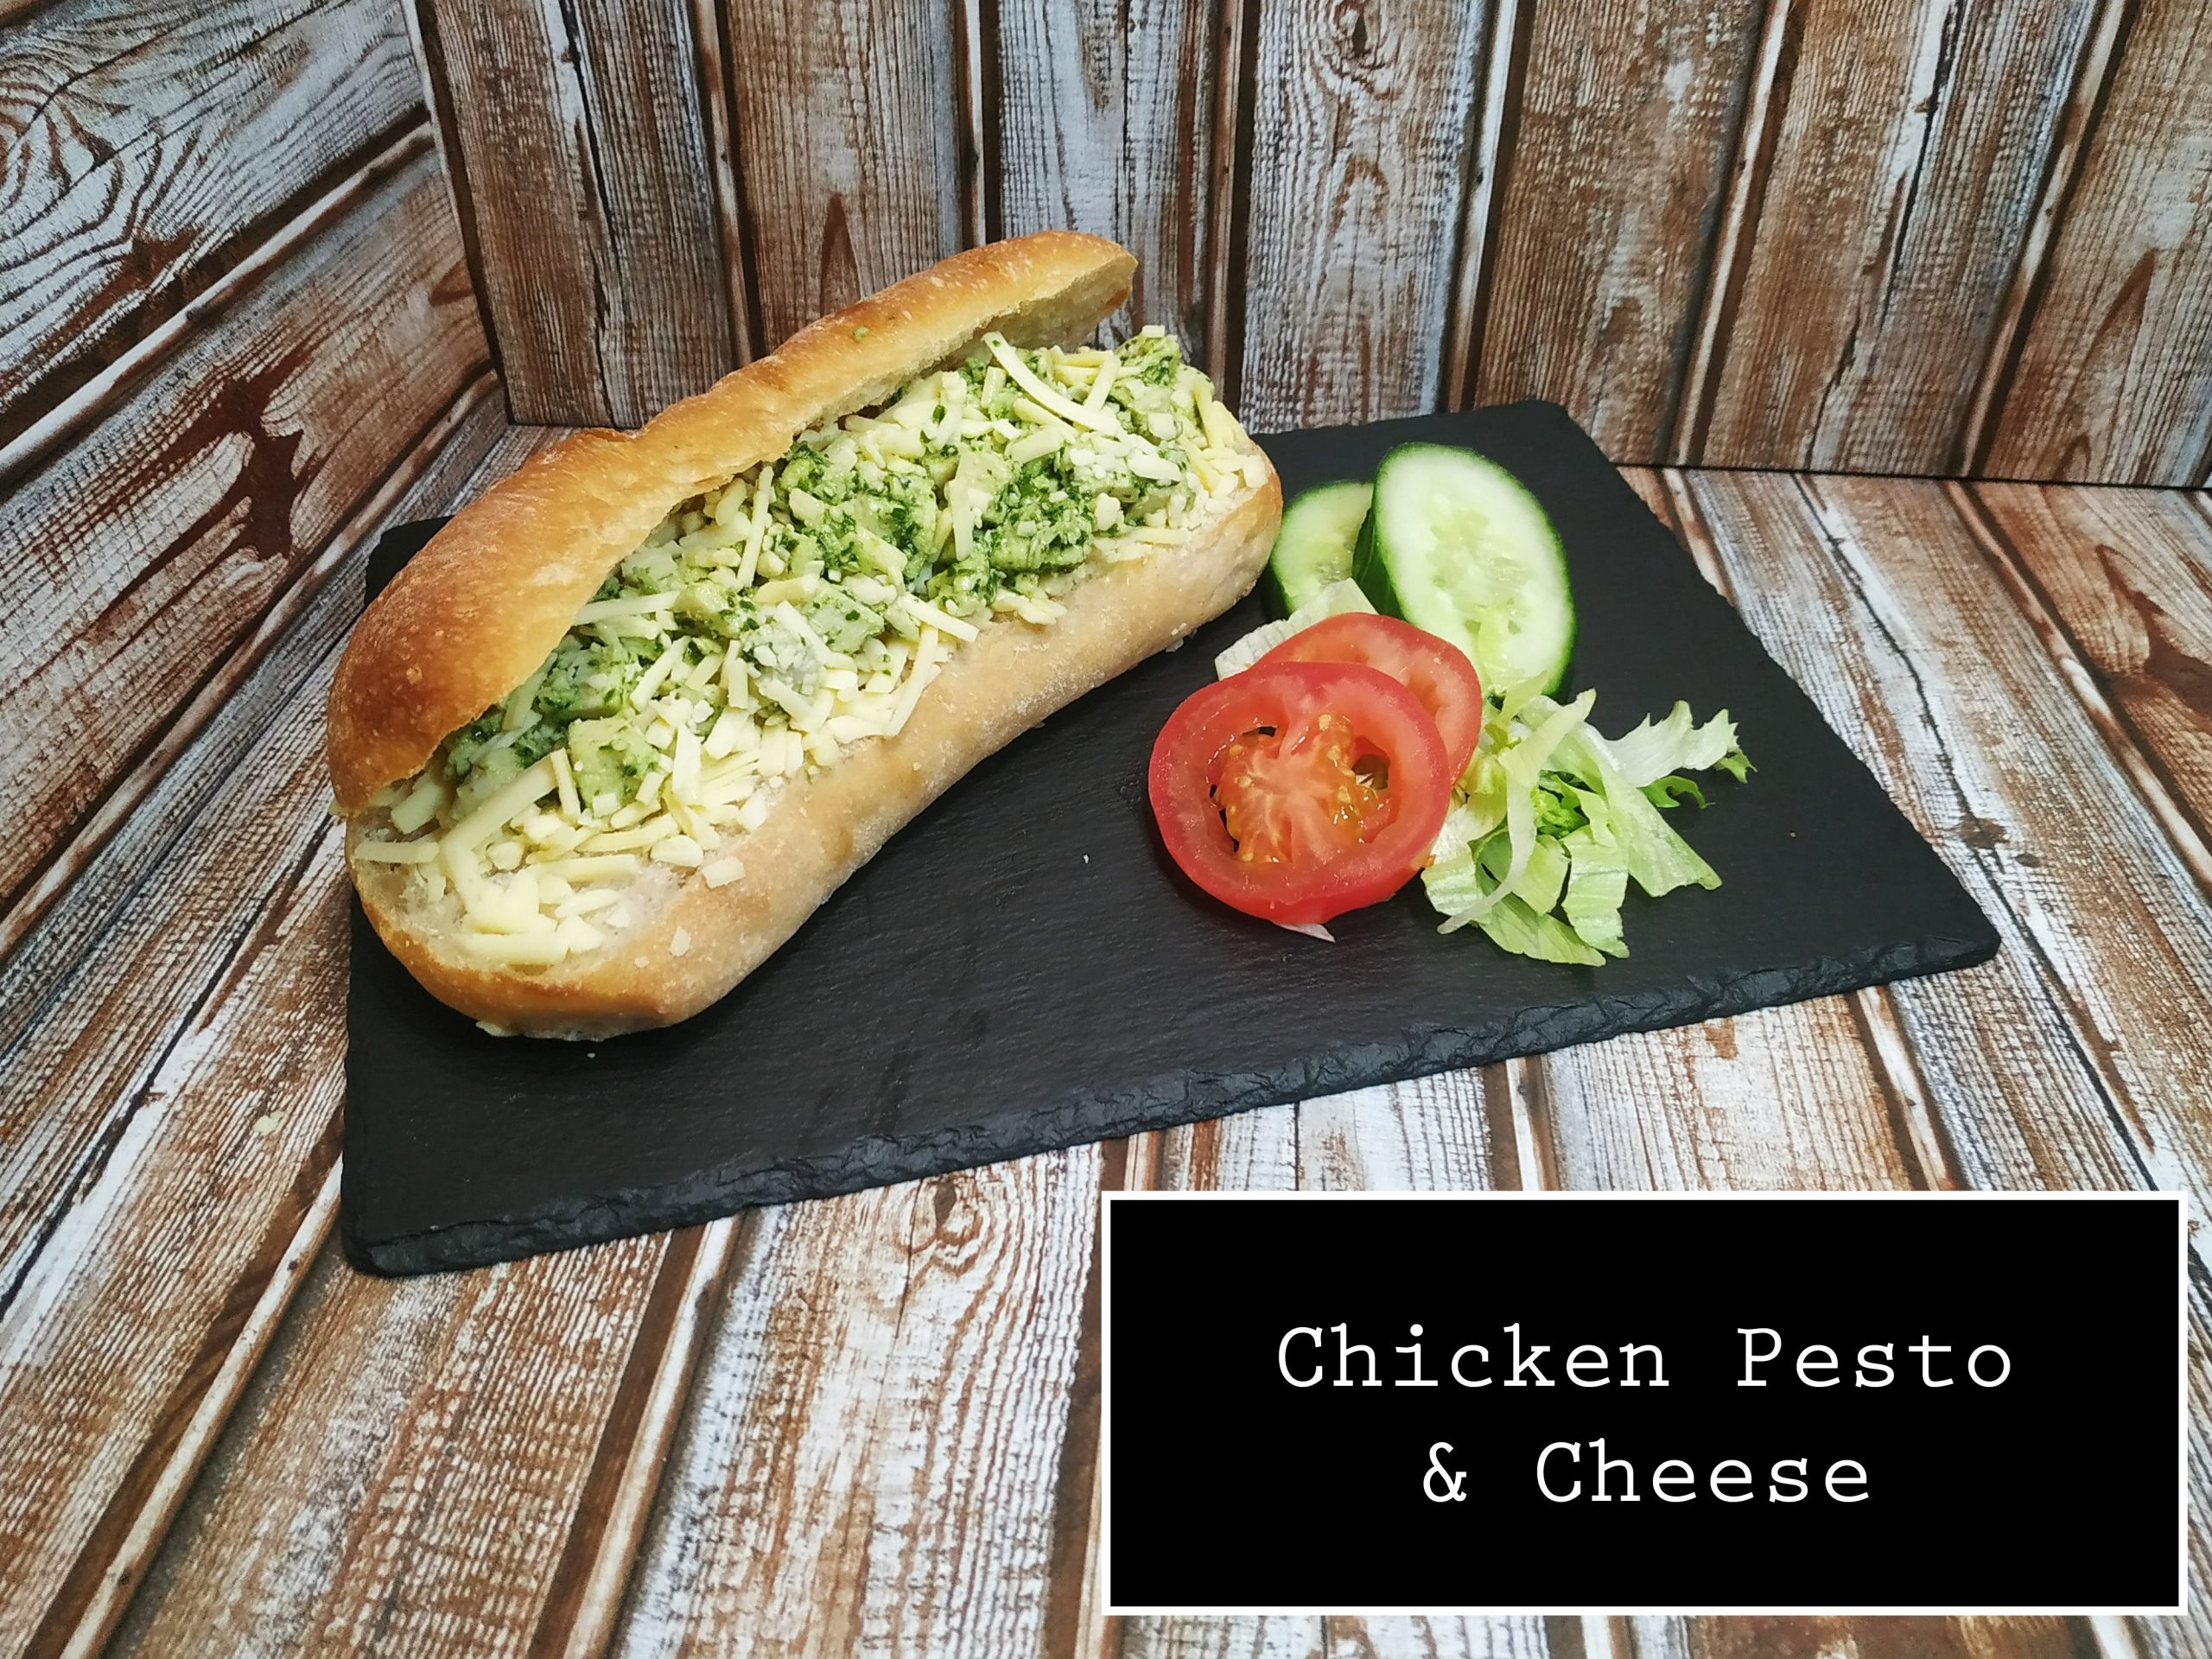 Chicken Pesto & Cheese  Panini by Sandwich in the Square